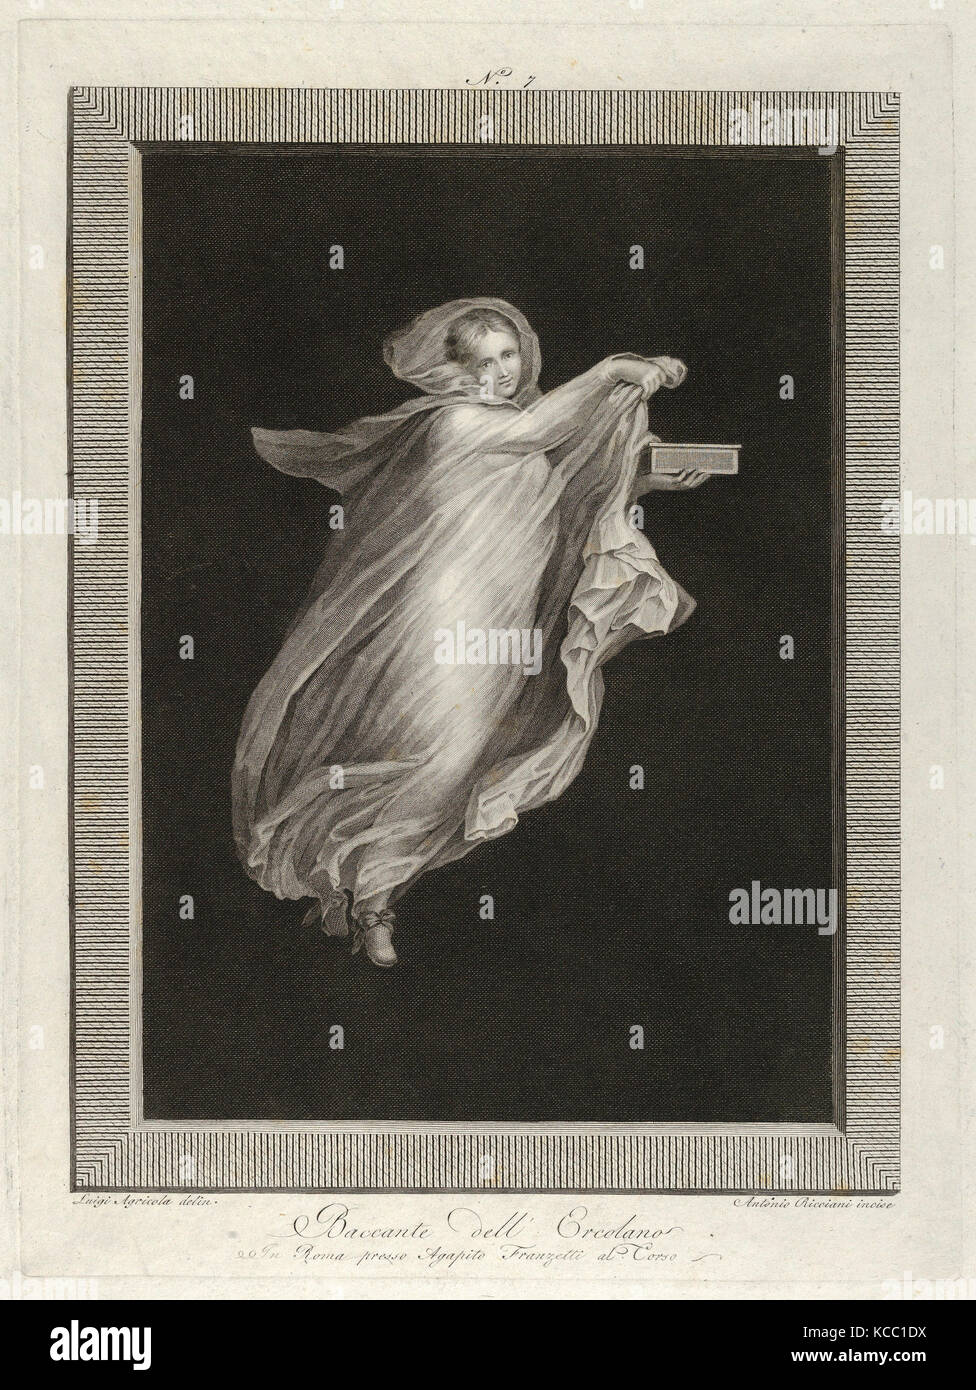 Drawings and Prints, Print, A bacchante wearing a hooded shawl and holding a box in her left hand Stock Photo